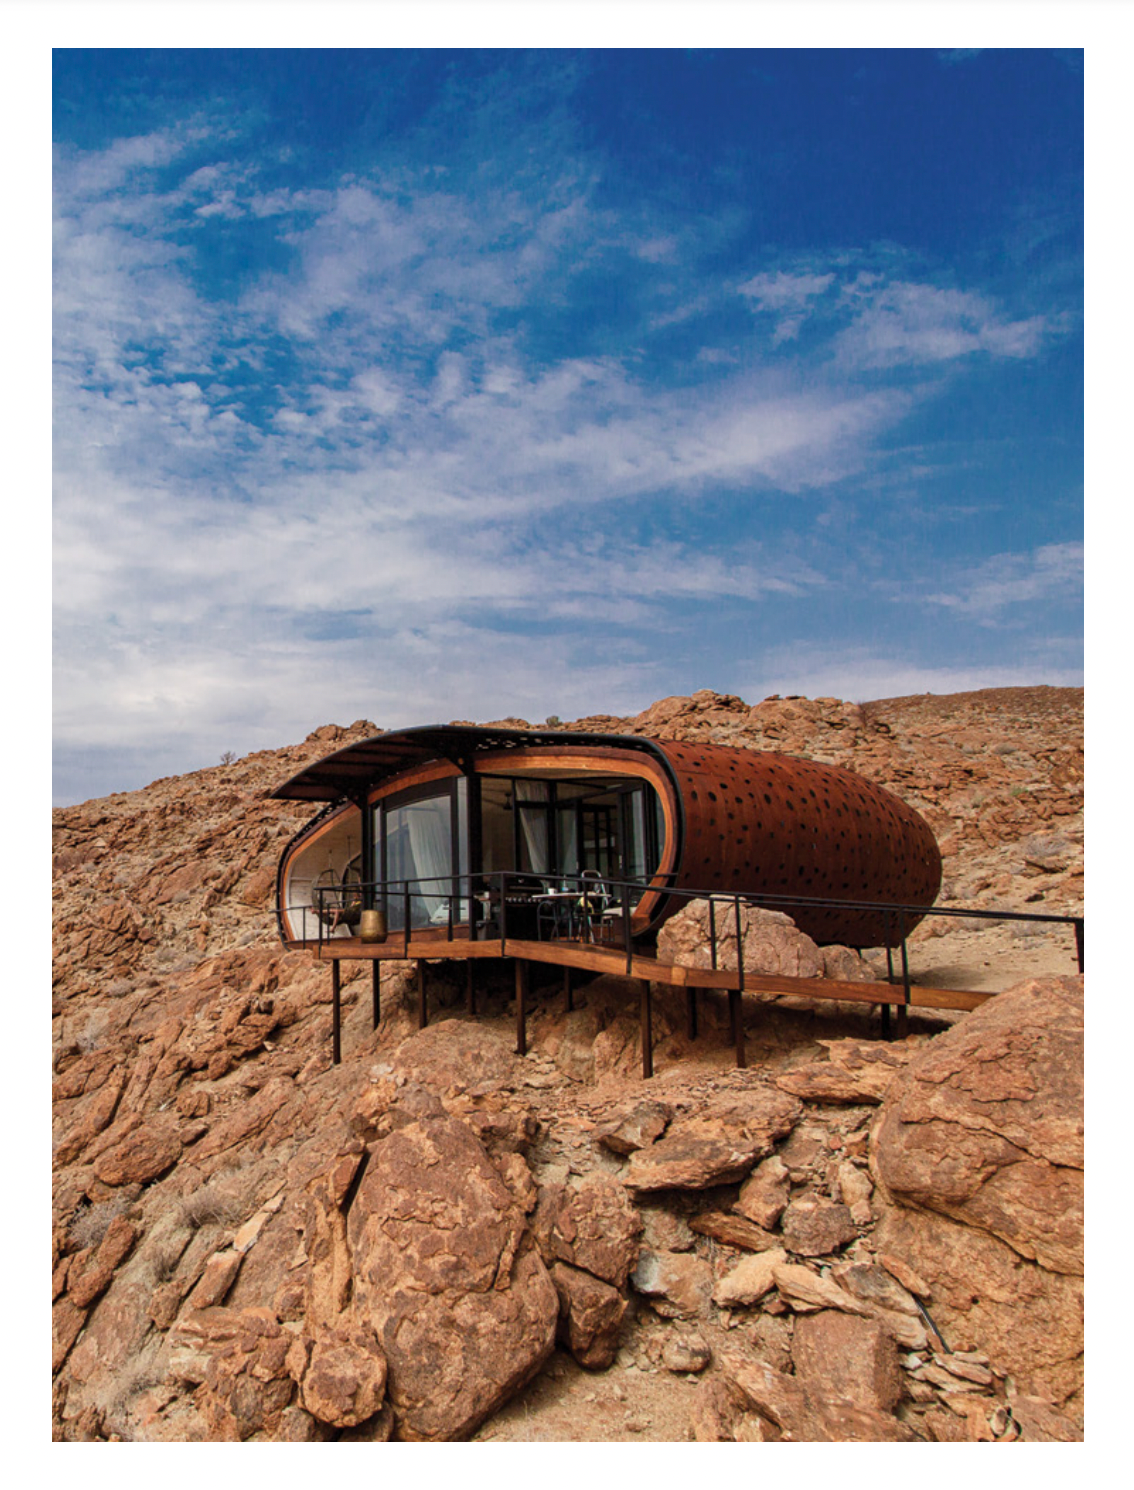 Desert Escapes, The world's most incredible places to stay